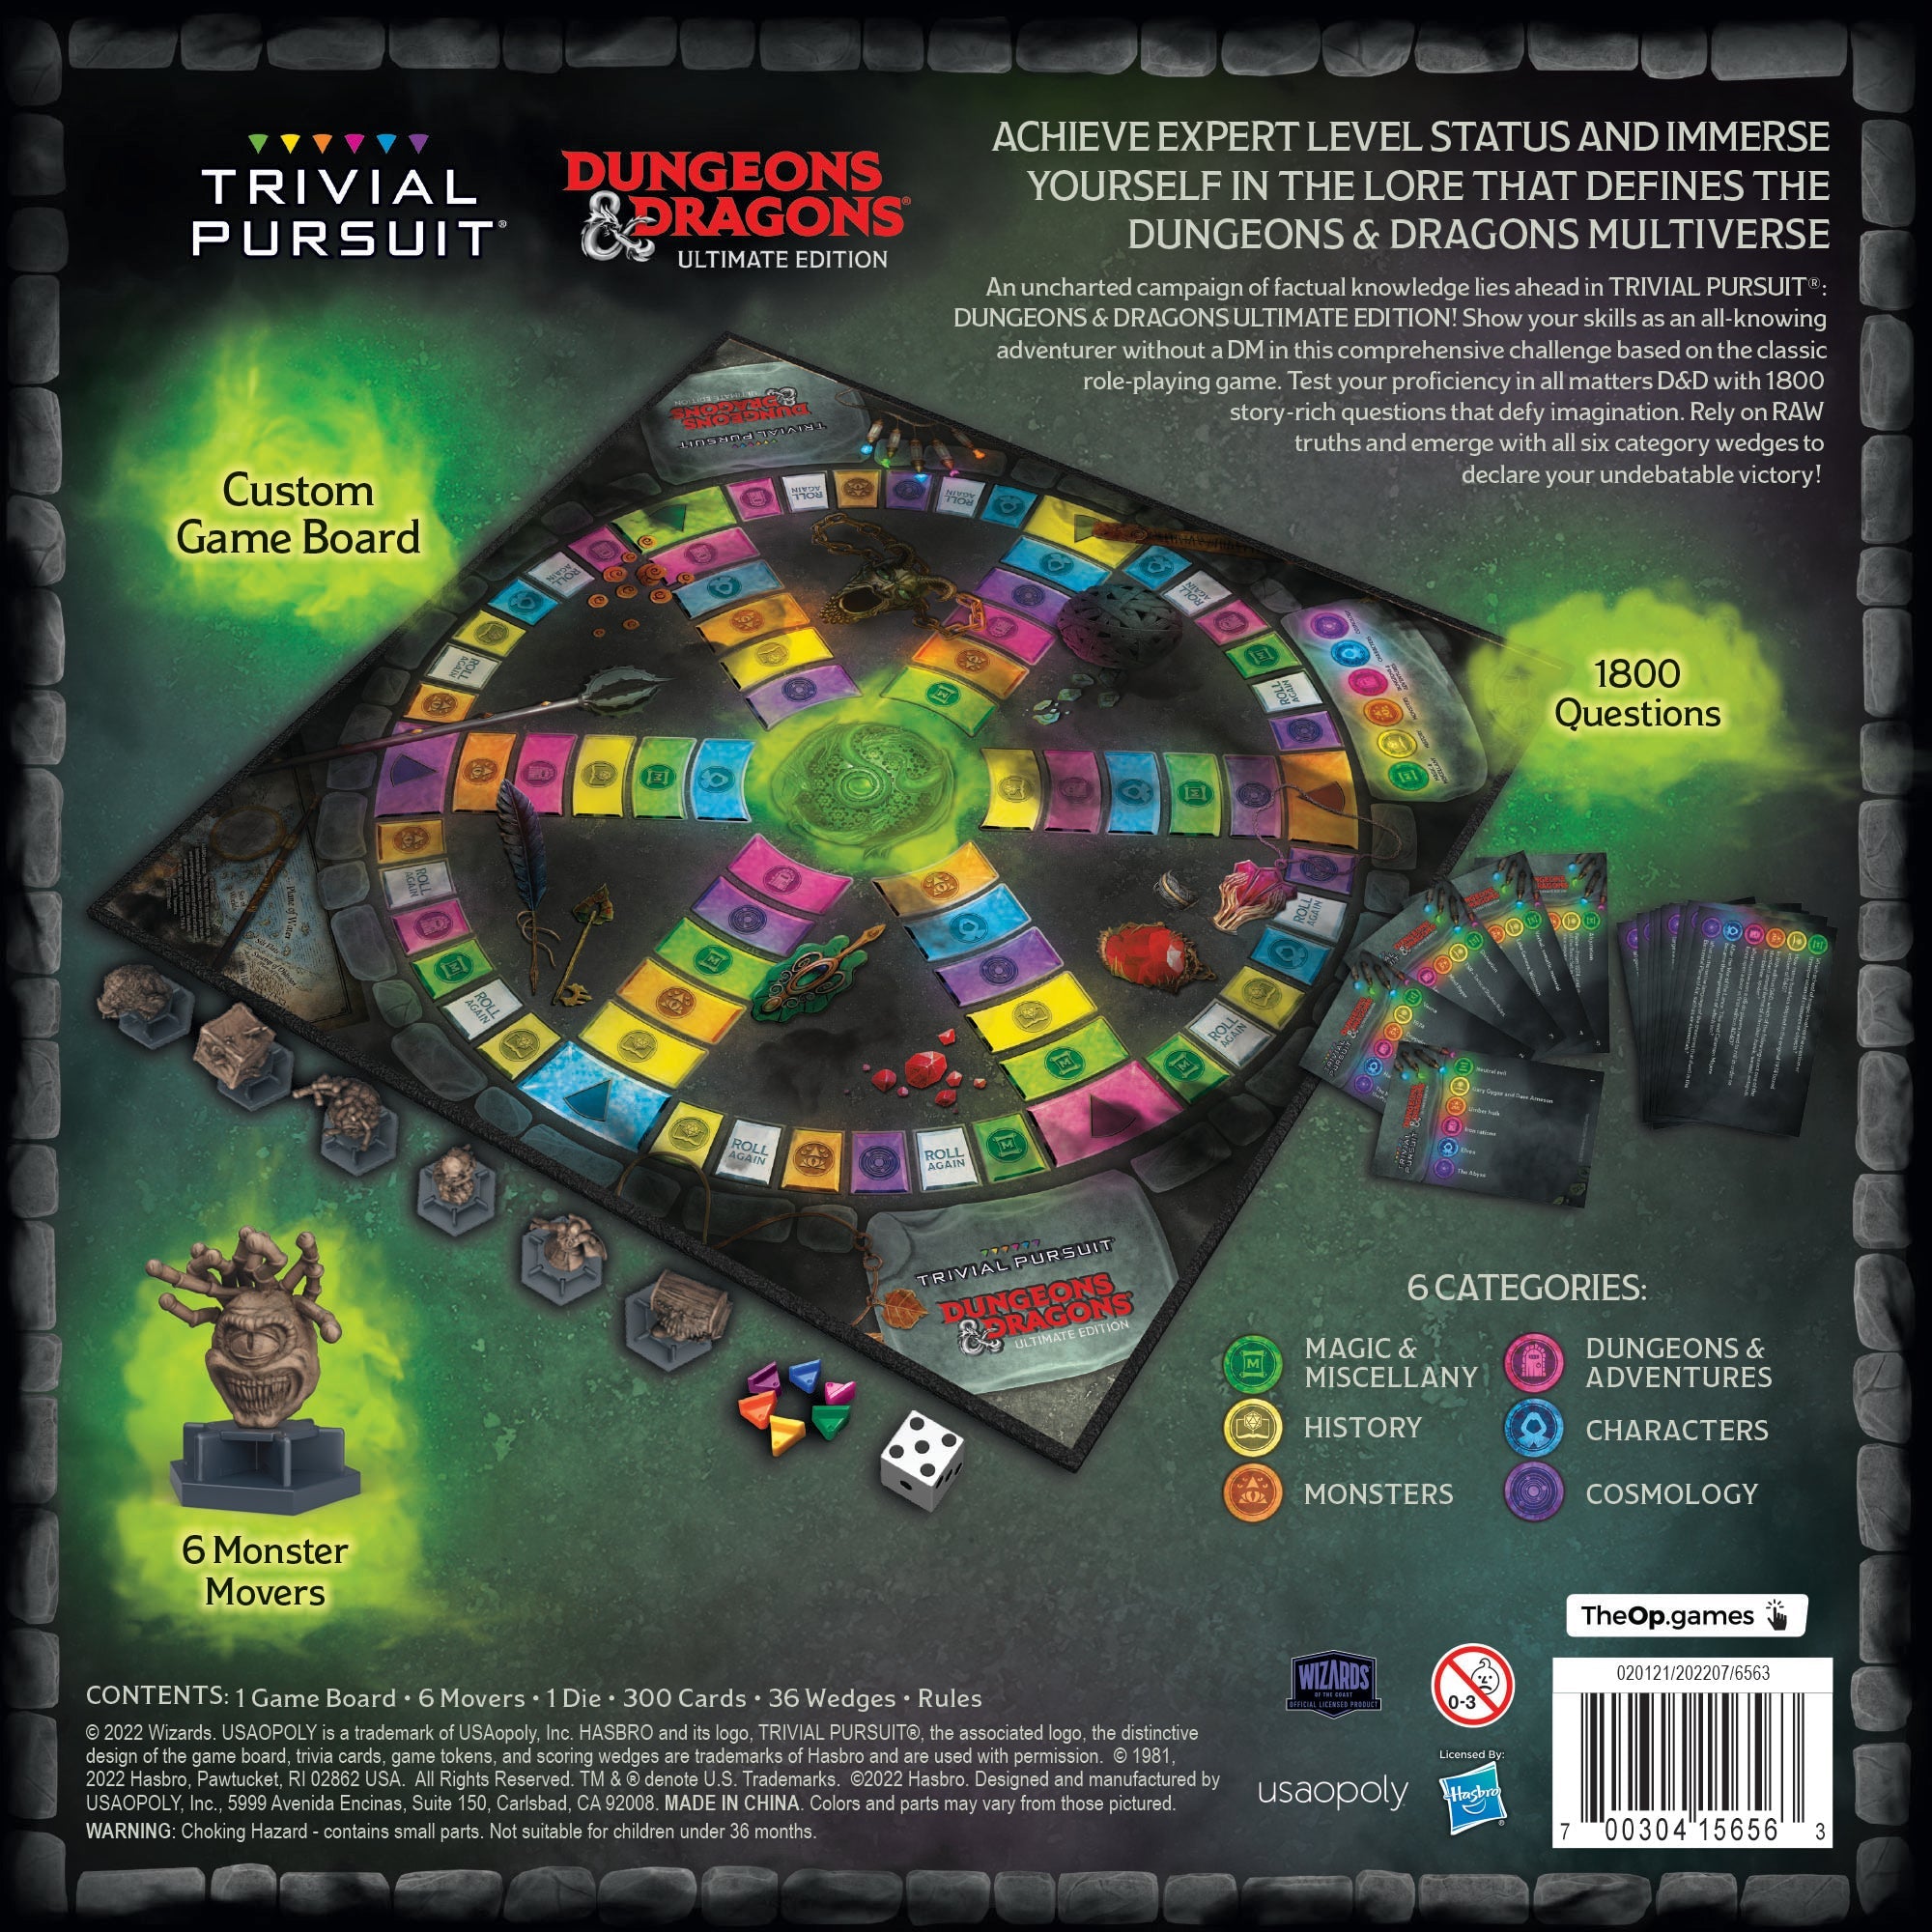 Trivial Pursuit®: Dungeons & Dragons Ultimate Edition - Bards & Cards